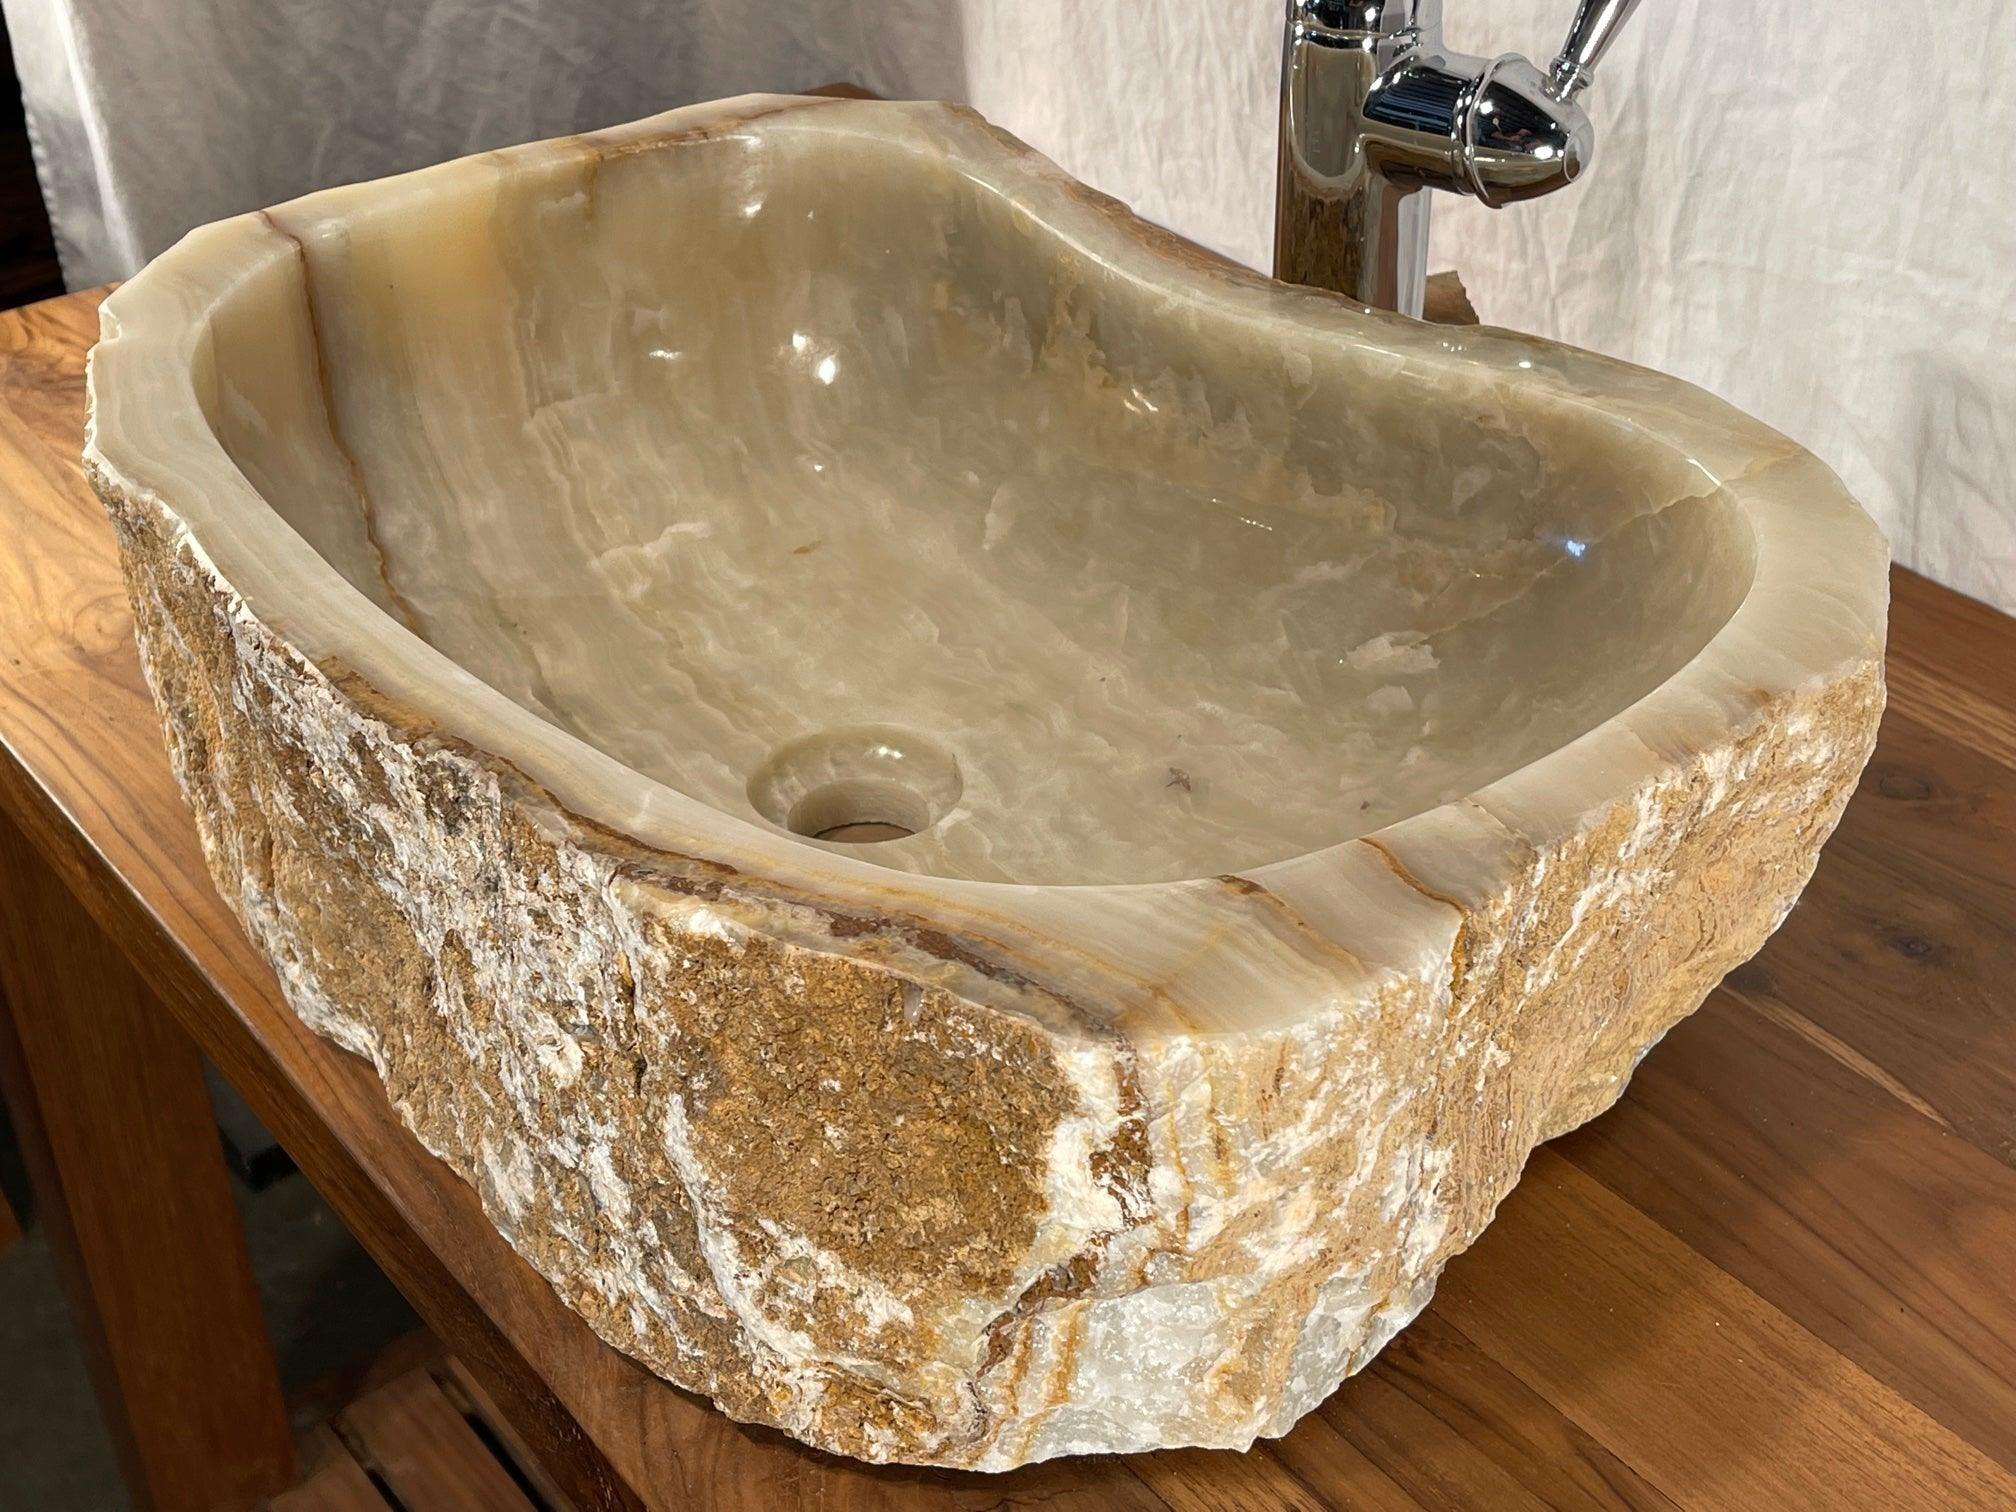 Onyx Vessel Sink with Natural Exterior from Impact Imports Boise ID